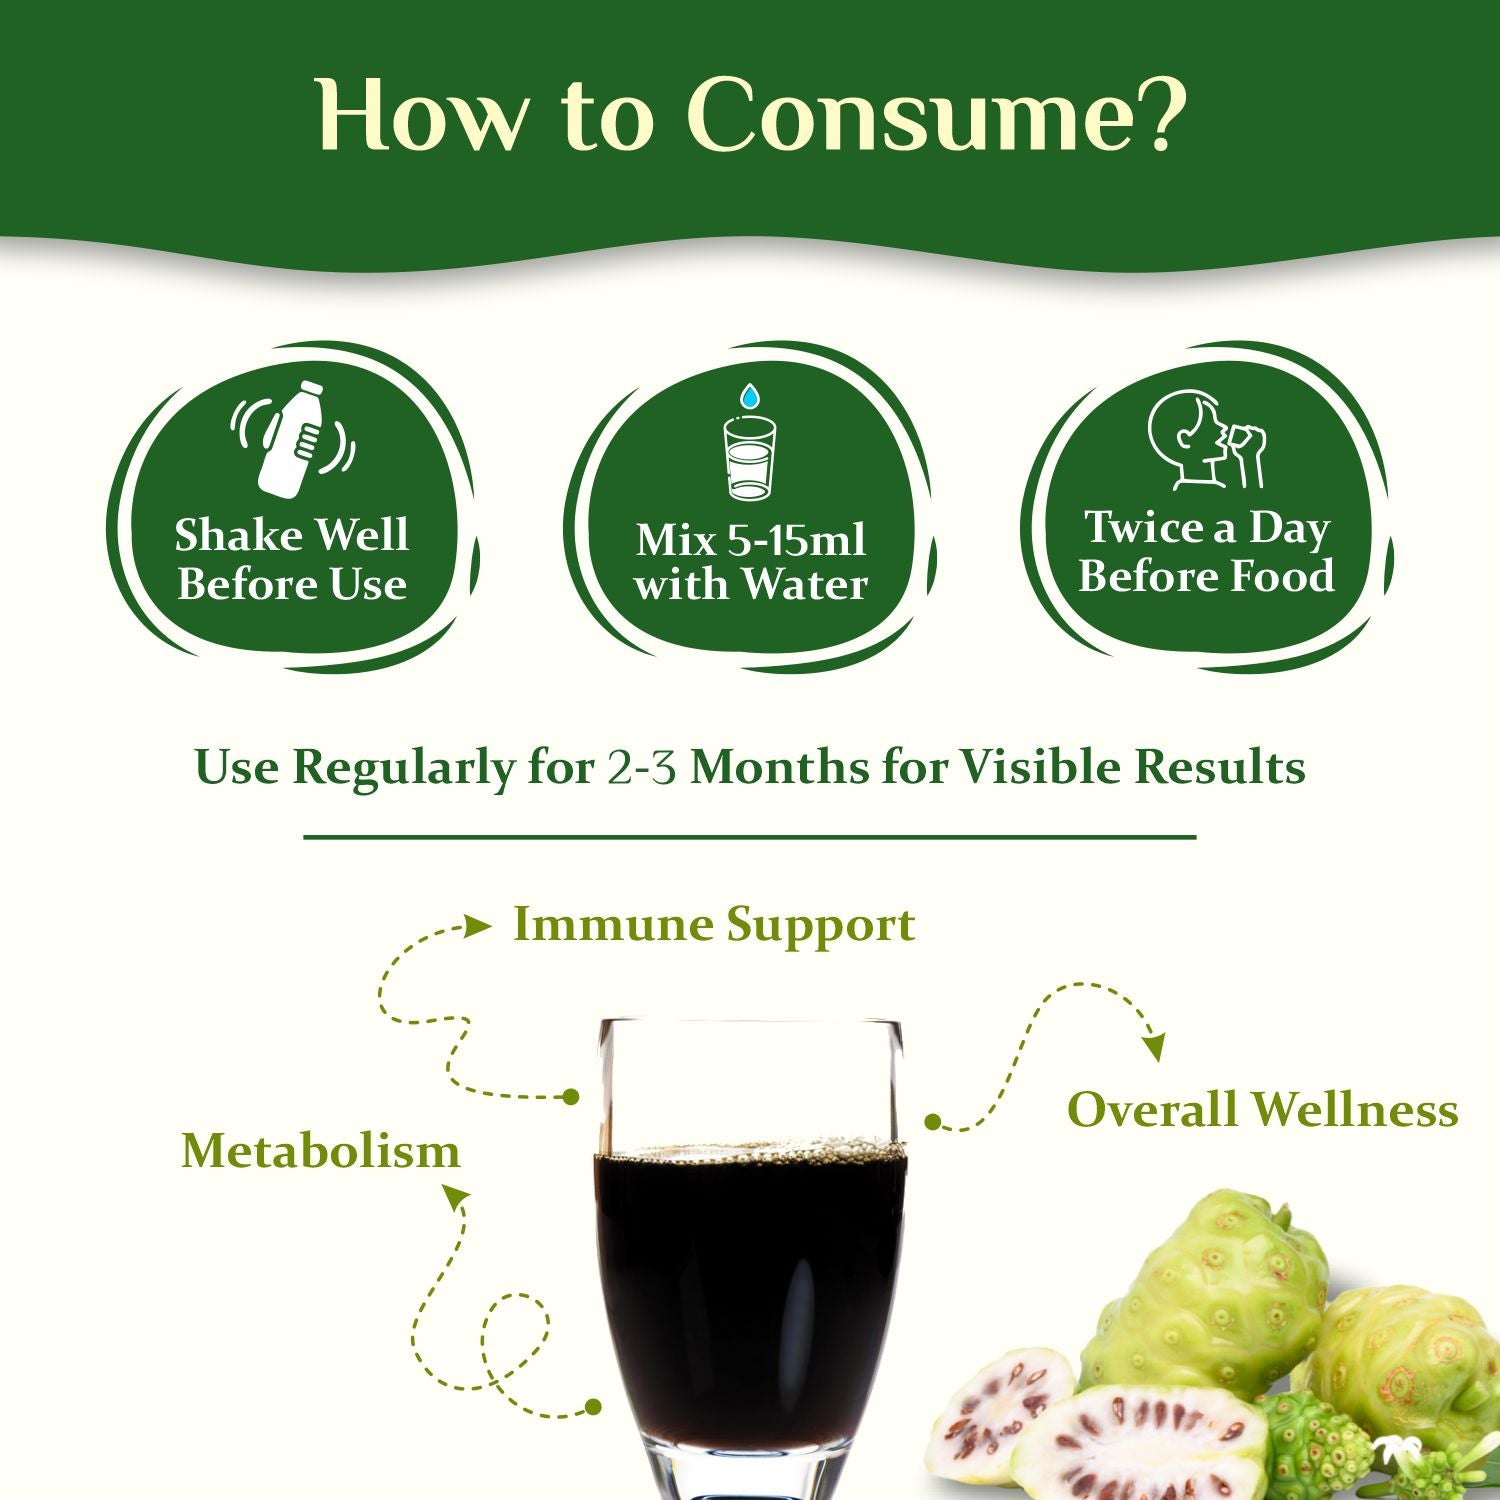 How to consume noni 365 wellness drink?